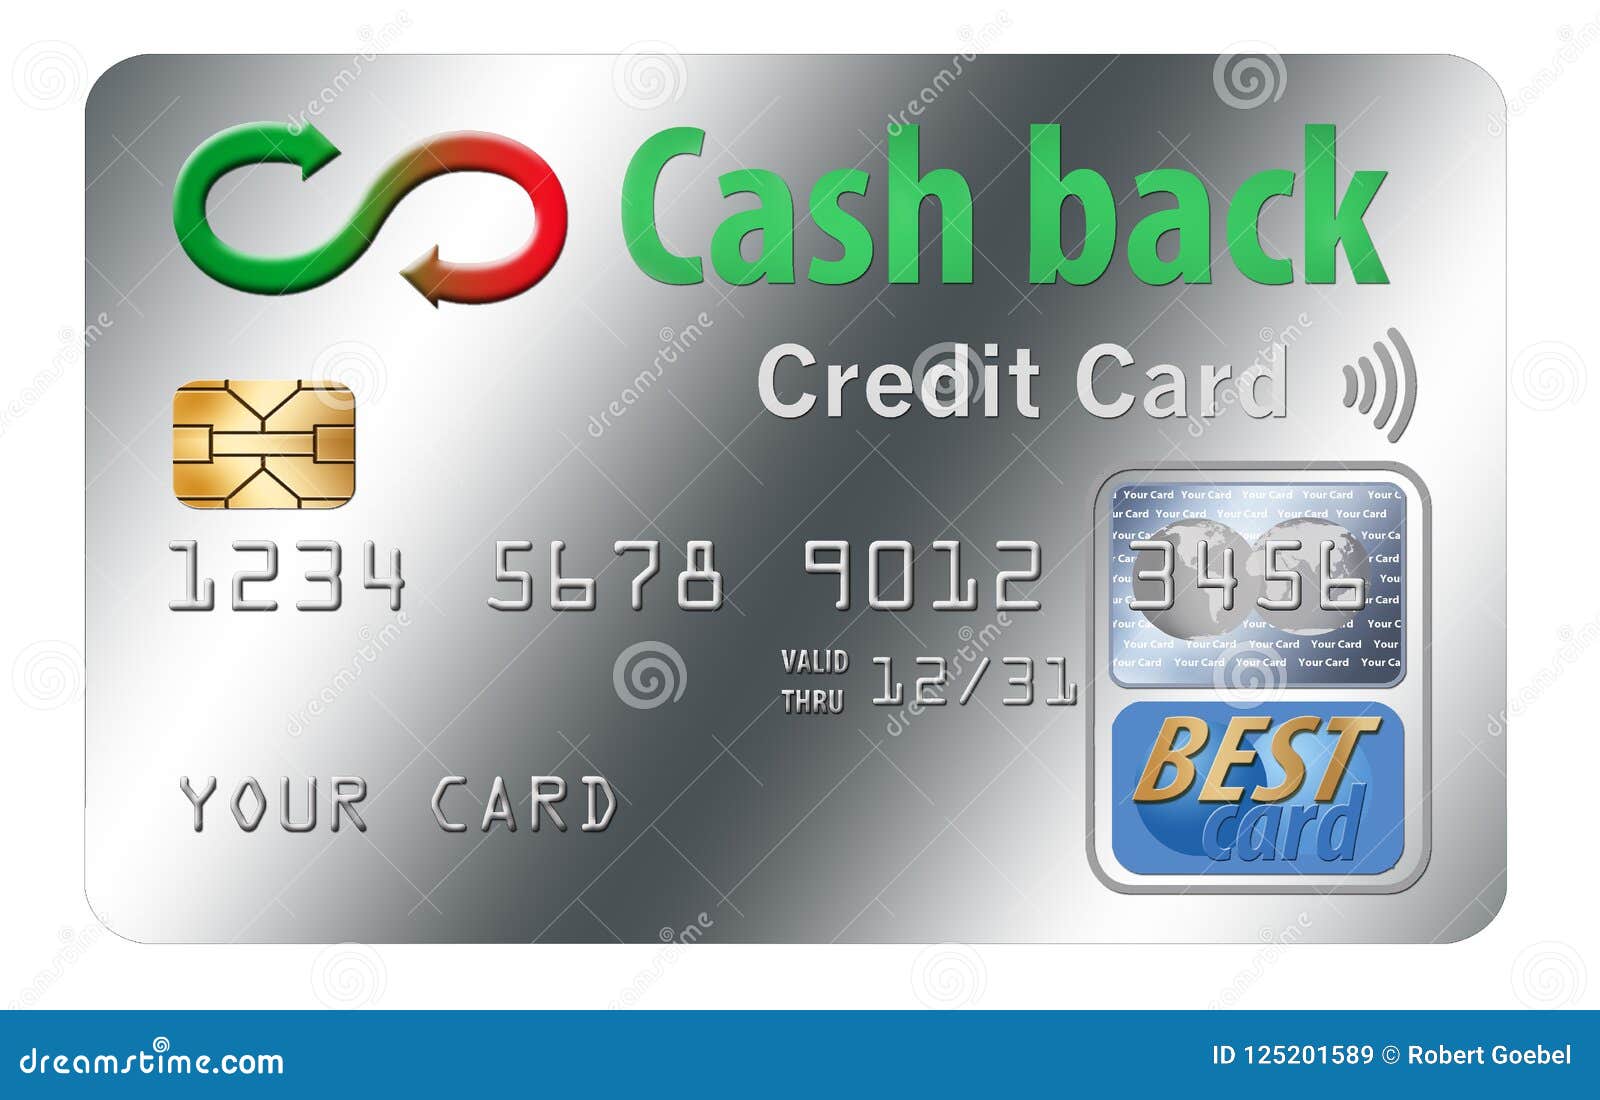 Can You Get Cashback With A Credit Card Return - Credit Walls